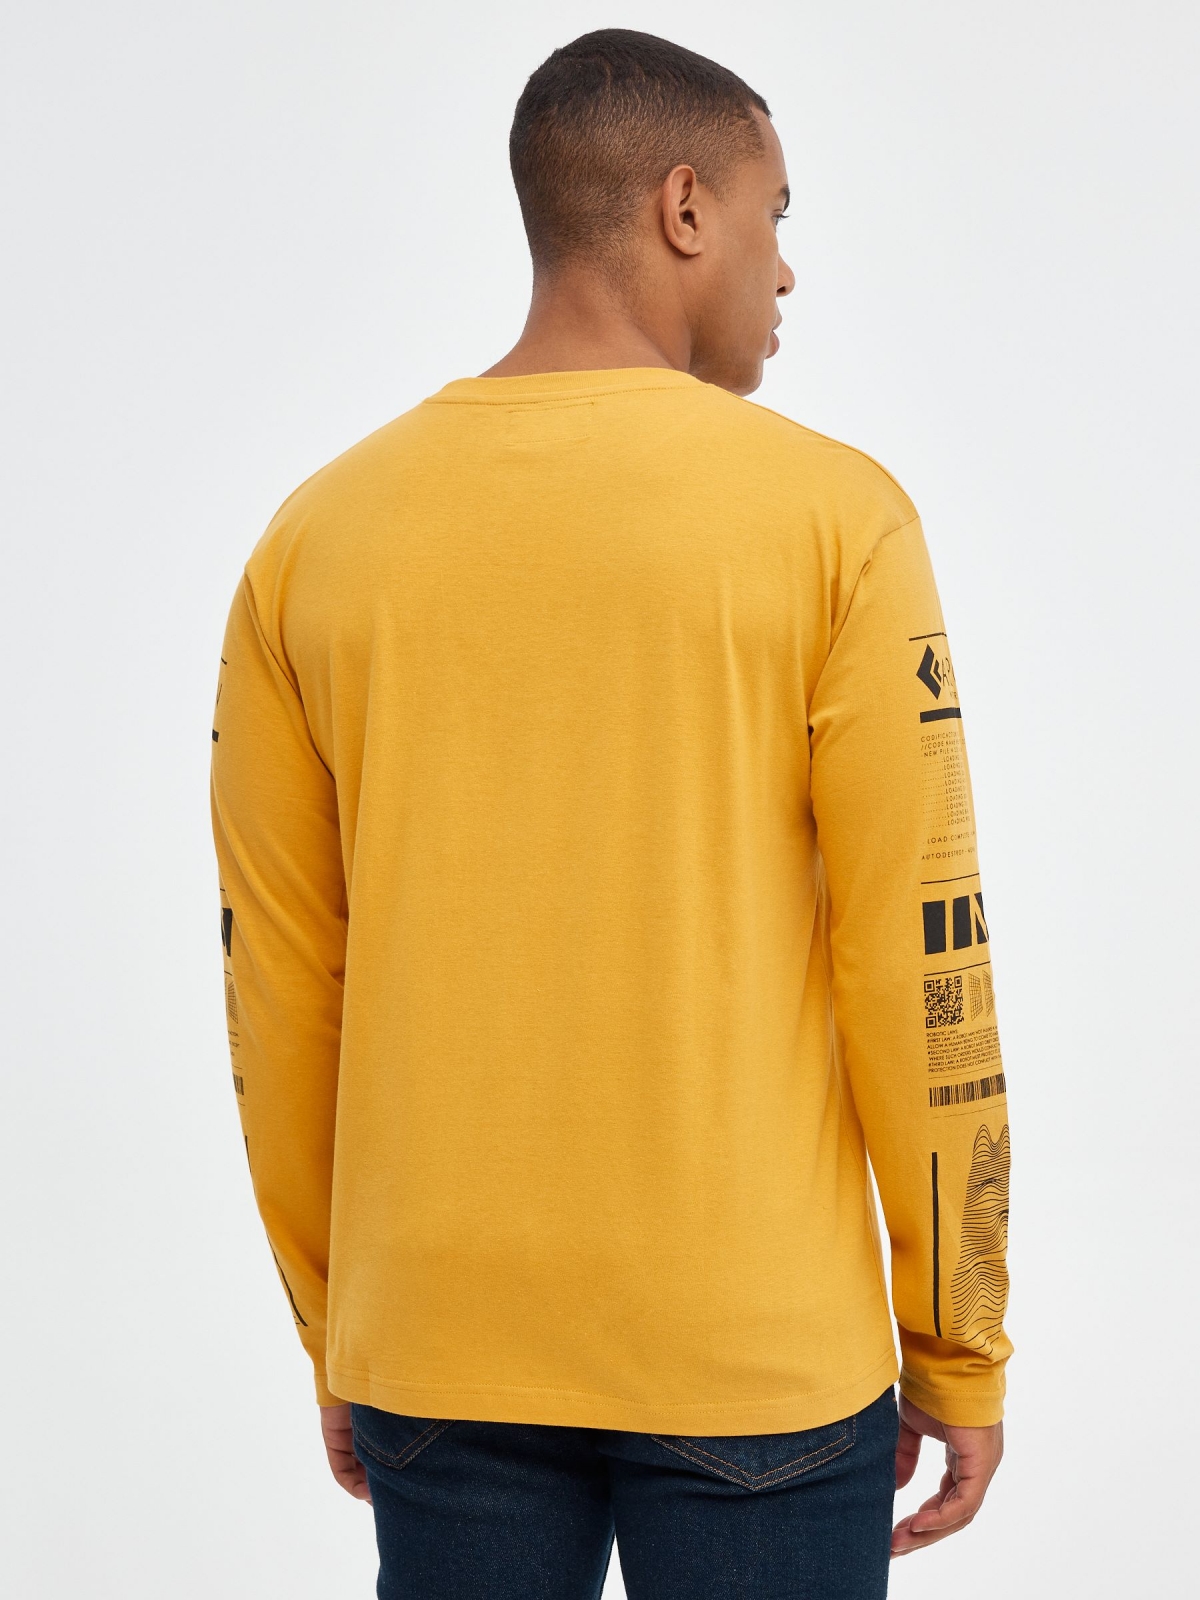 Cyber print T-shirt on sleeves ochre middle back view